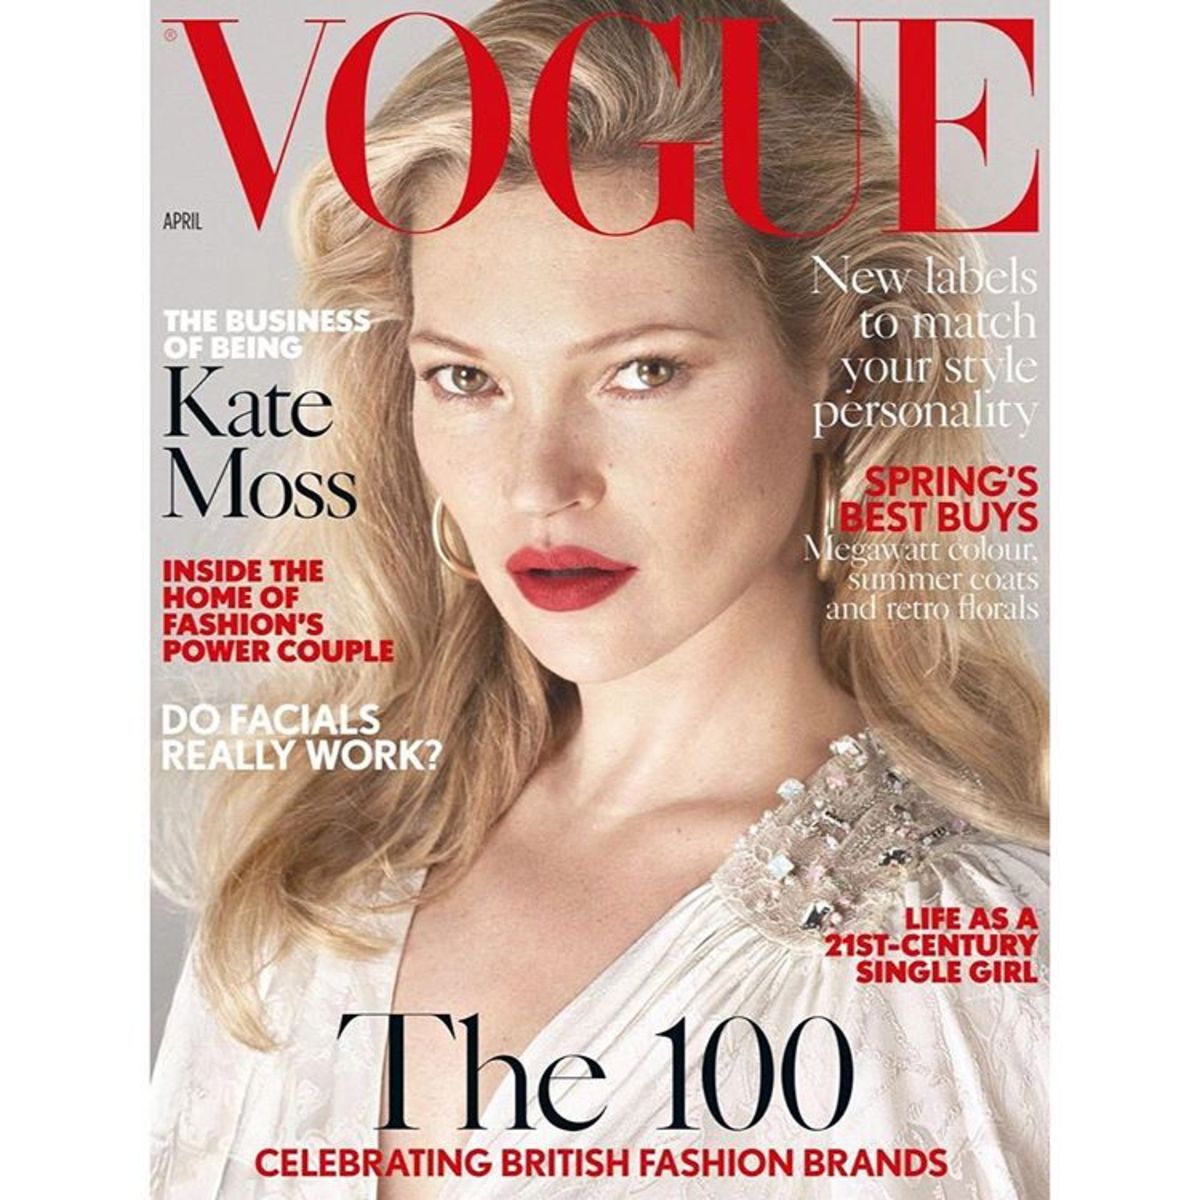 Kate Moss on the April 2017 issue of "Vogue" UK. Photo: Mert & Marcus